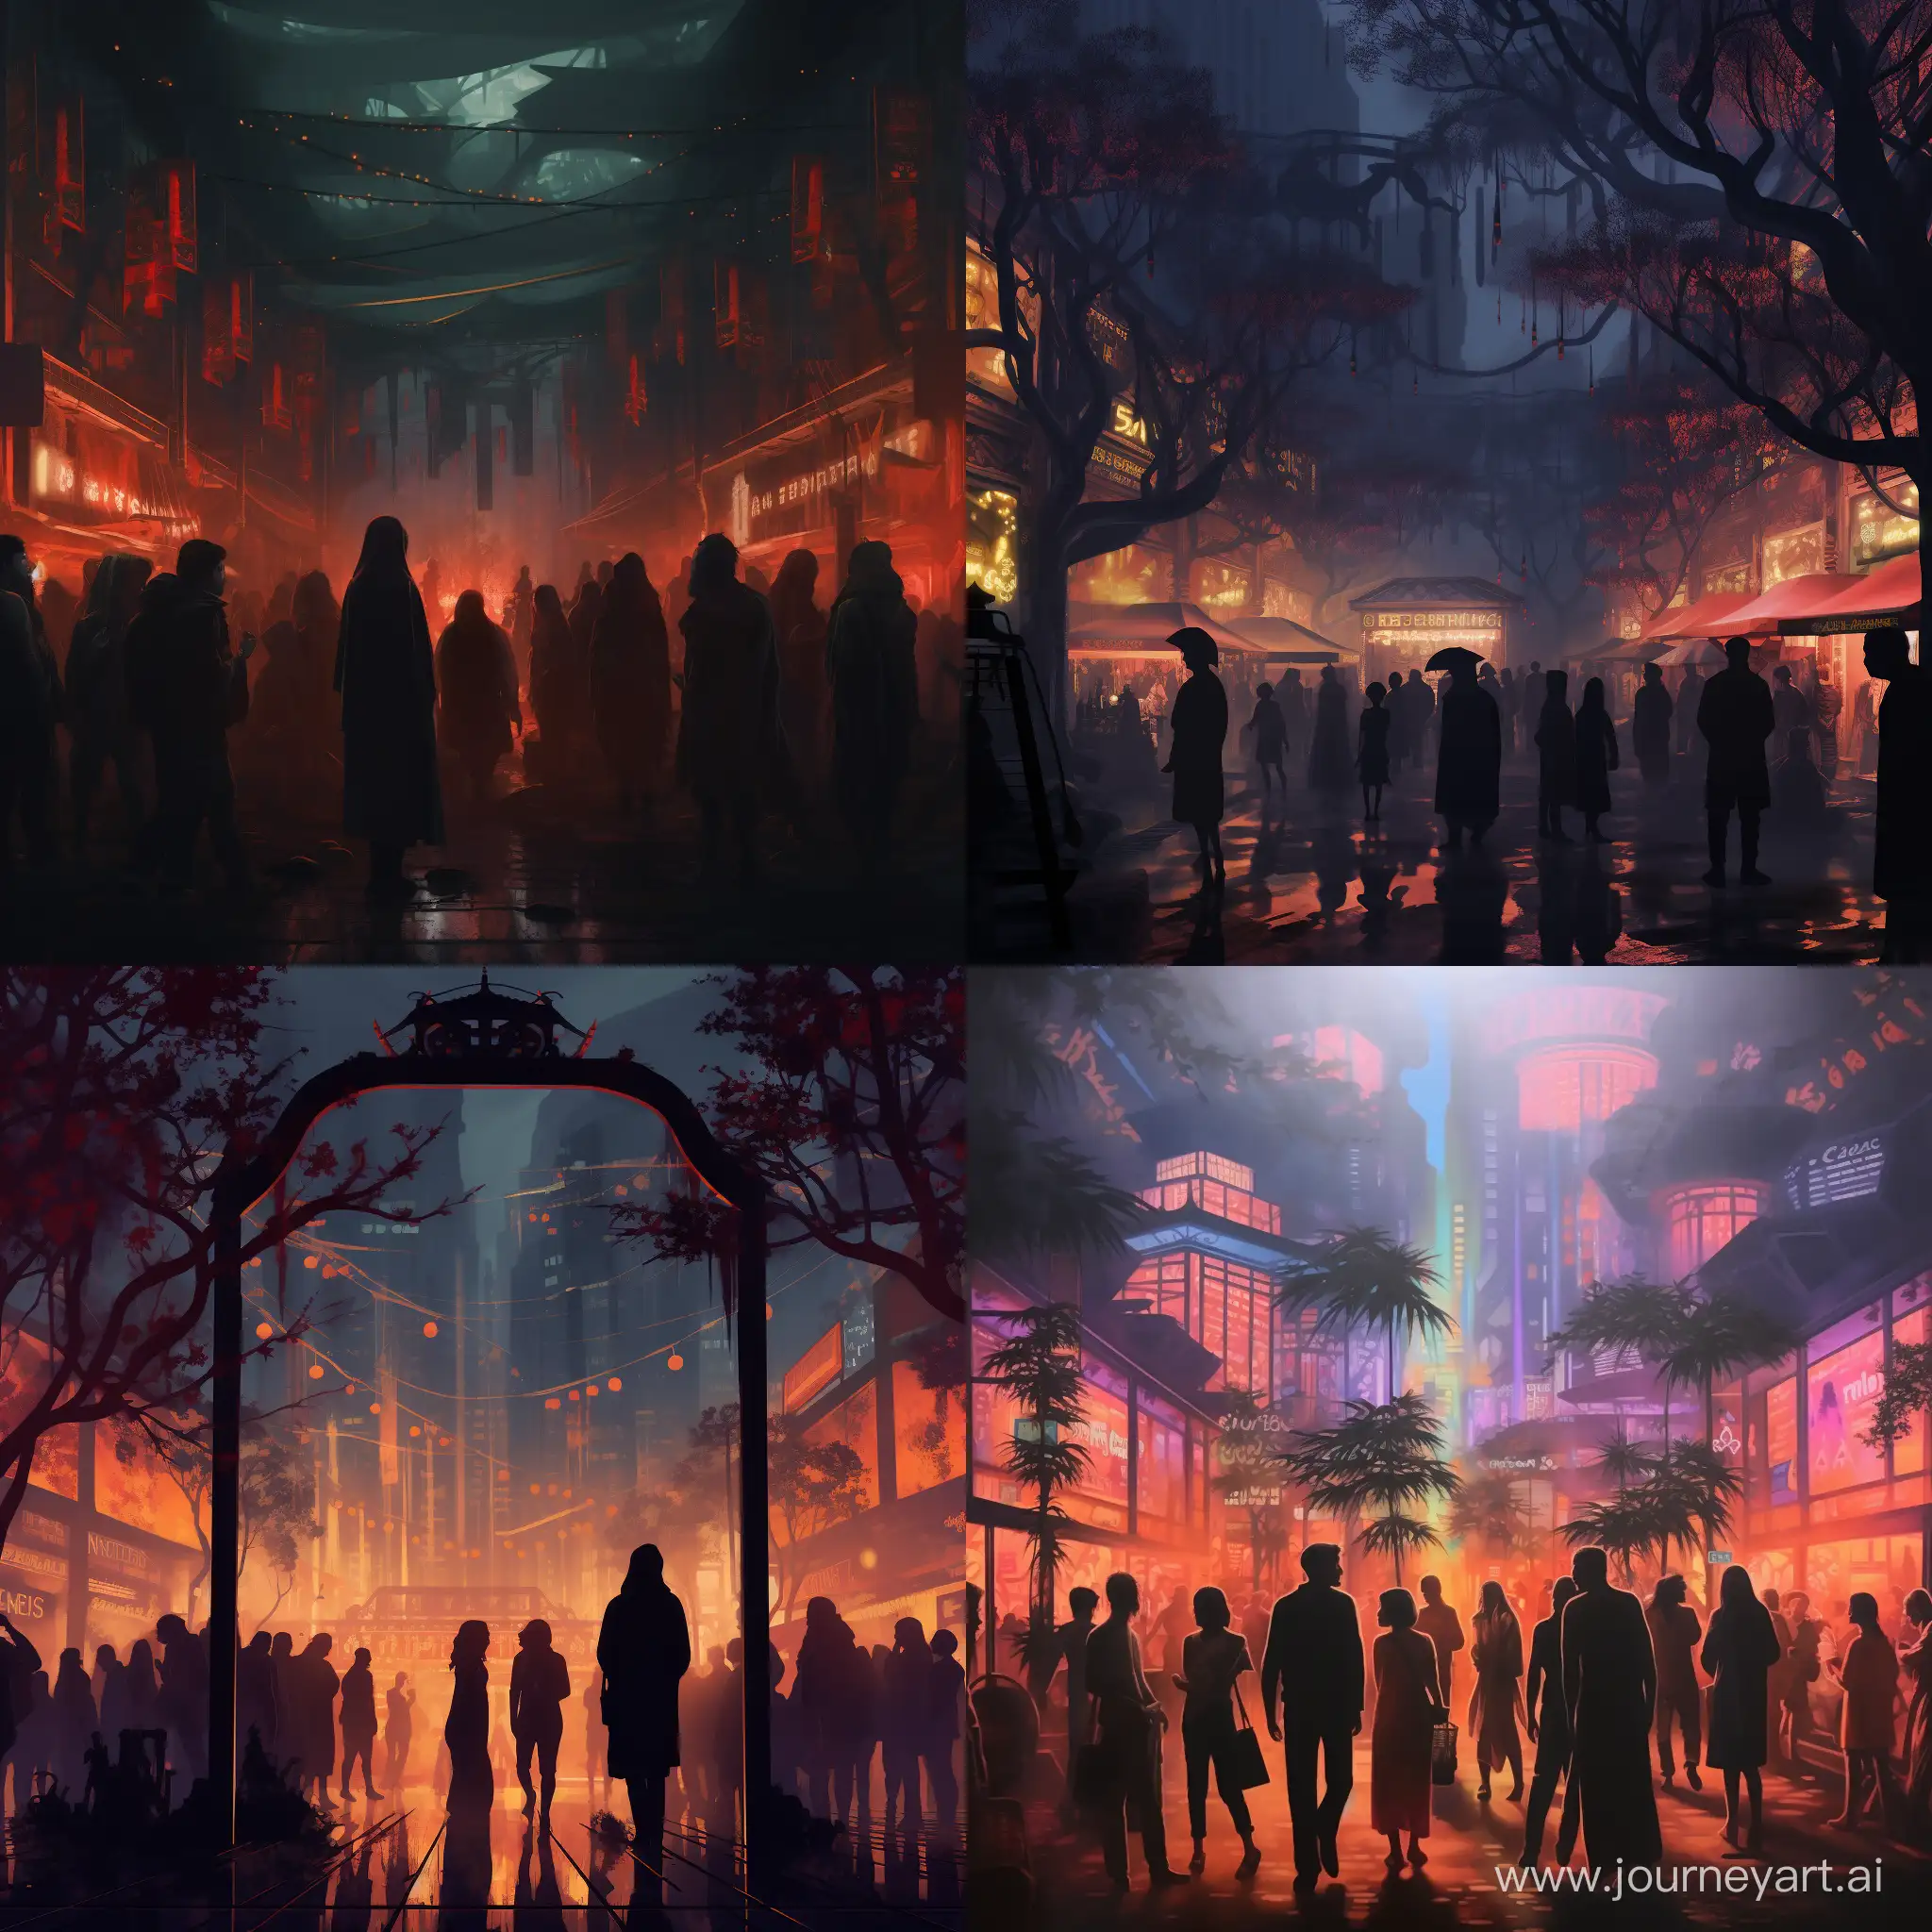 crowds of robed people walking and standing in a beautiful foggy dystopian market, trees, pillars, archways, robed silhouettes, male and female, neon signs